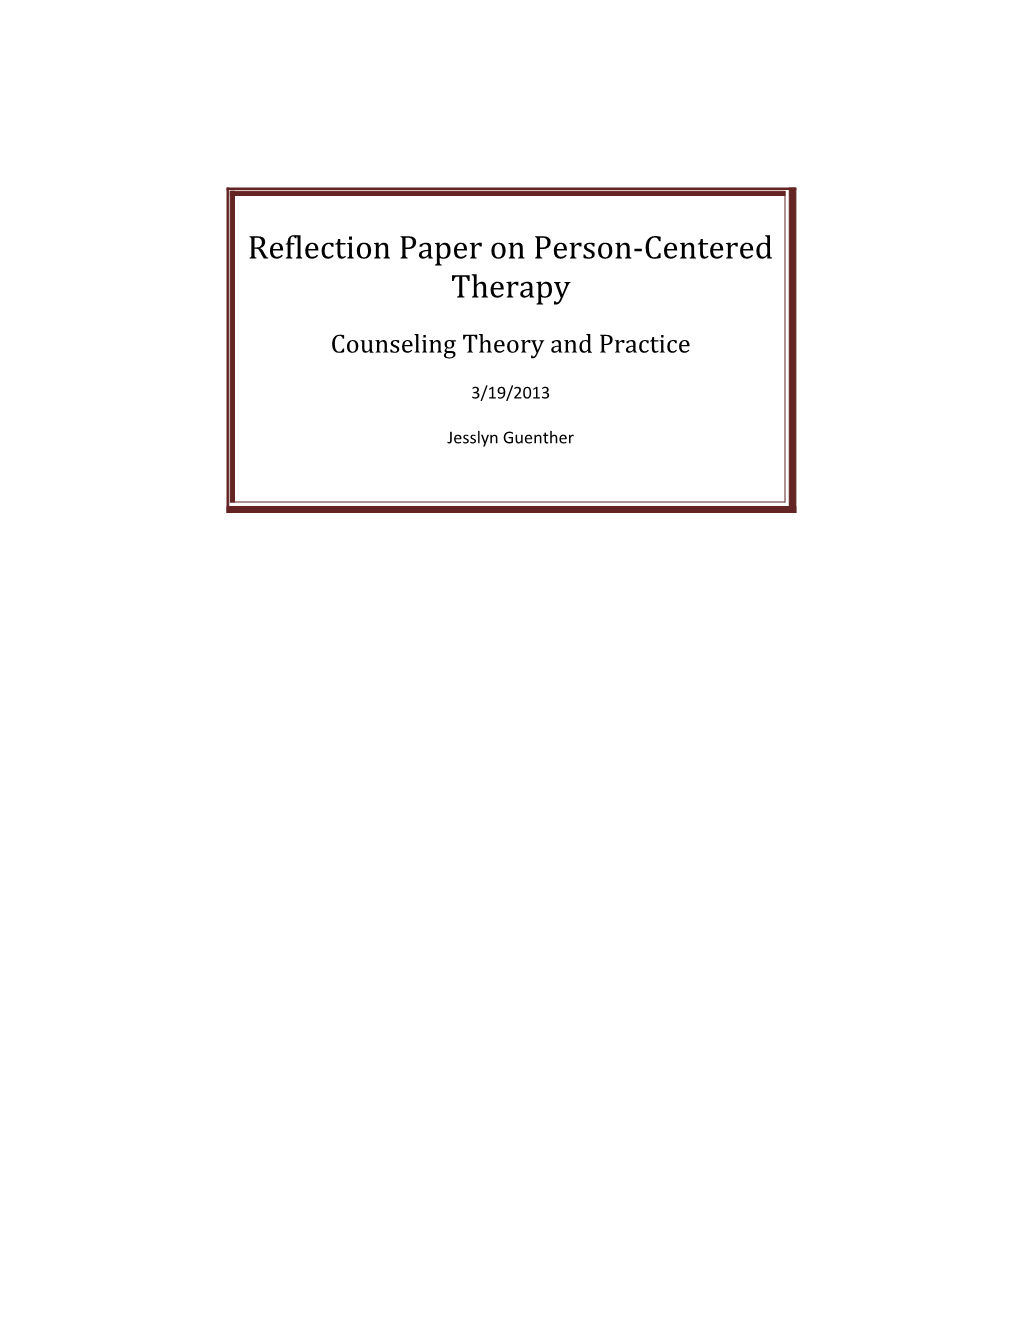 Reflection Paper on Person-Centered Therapy